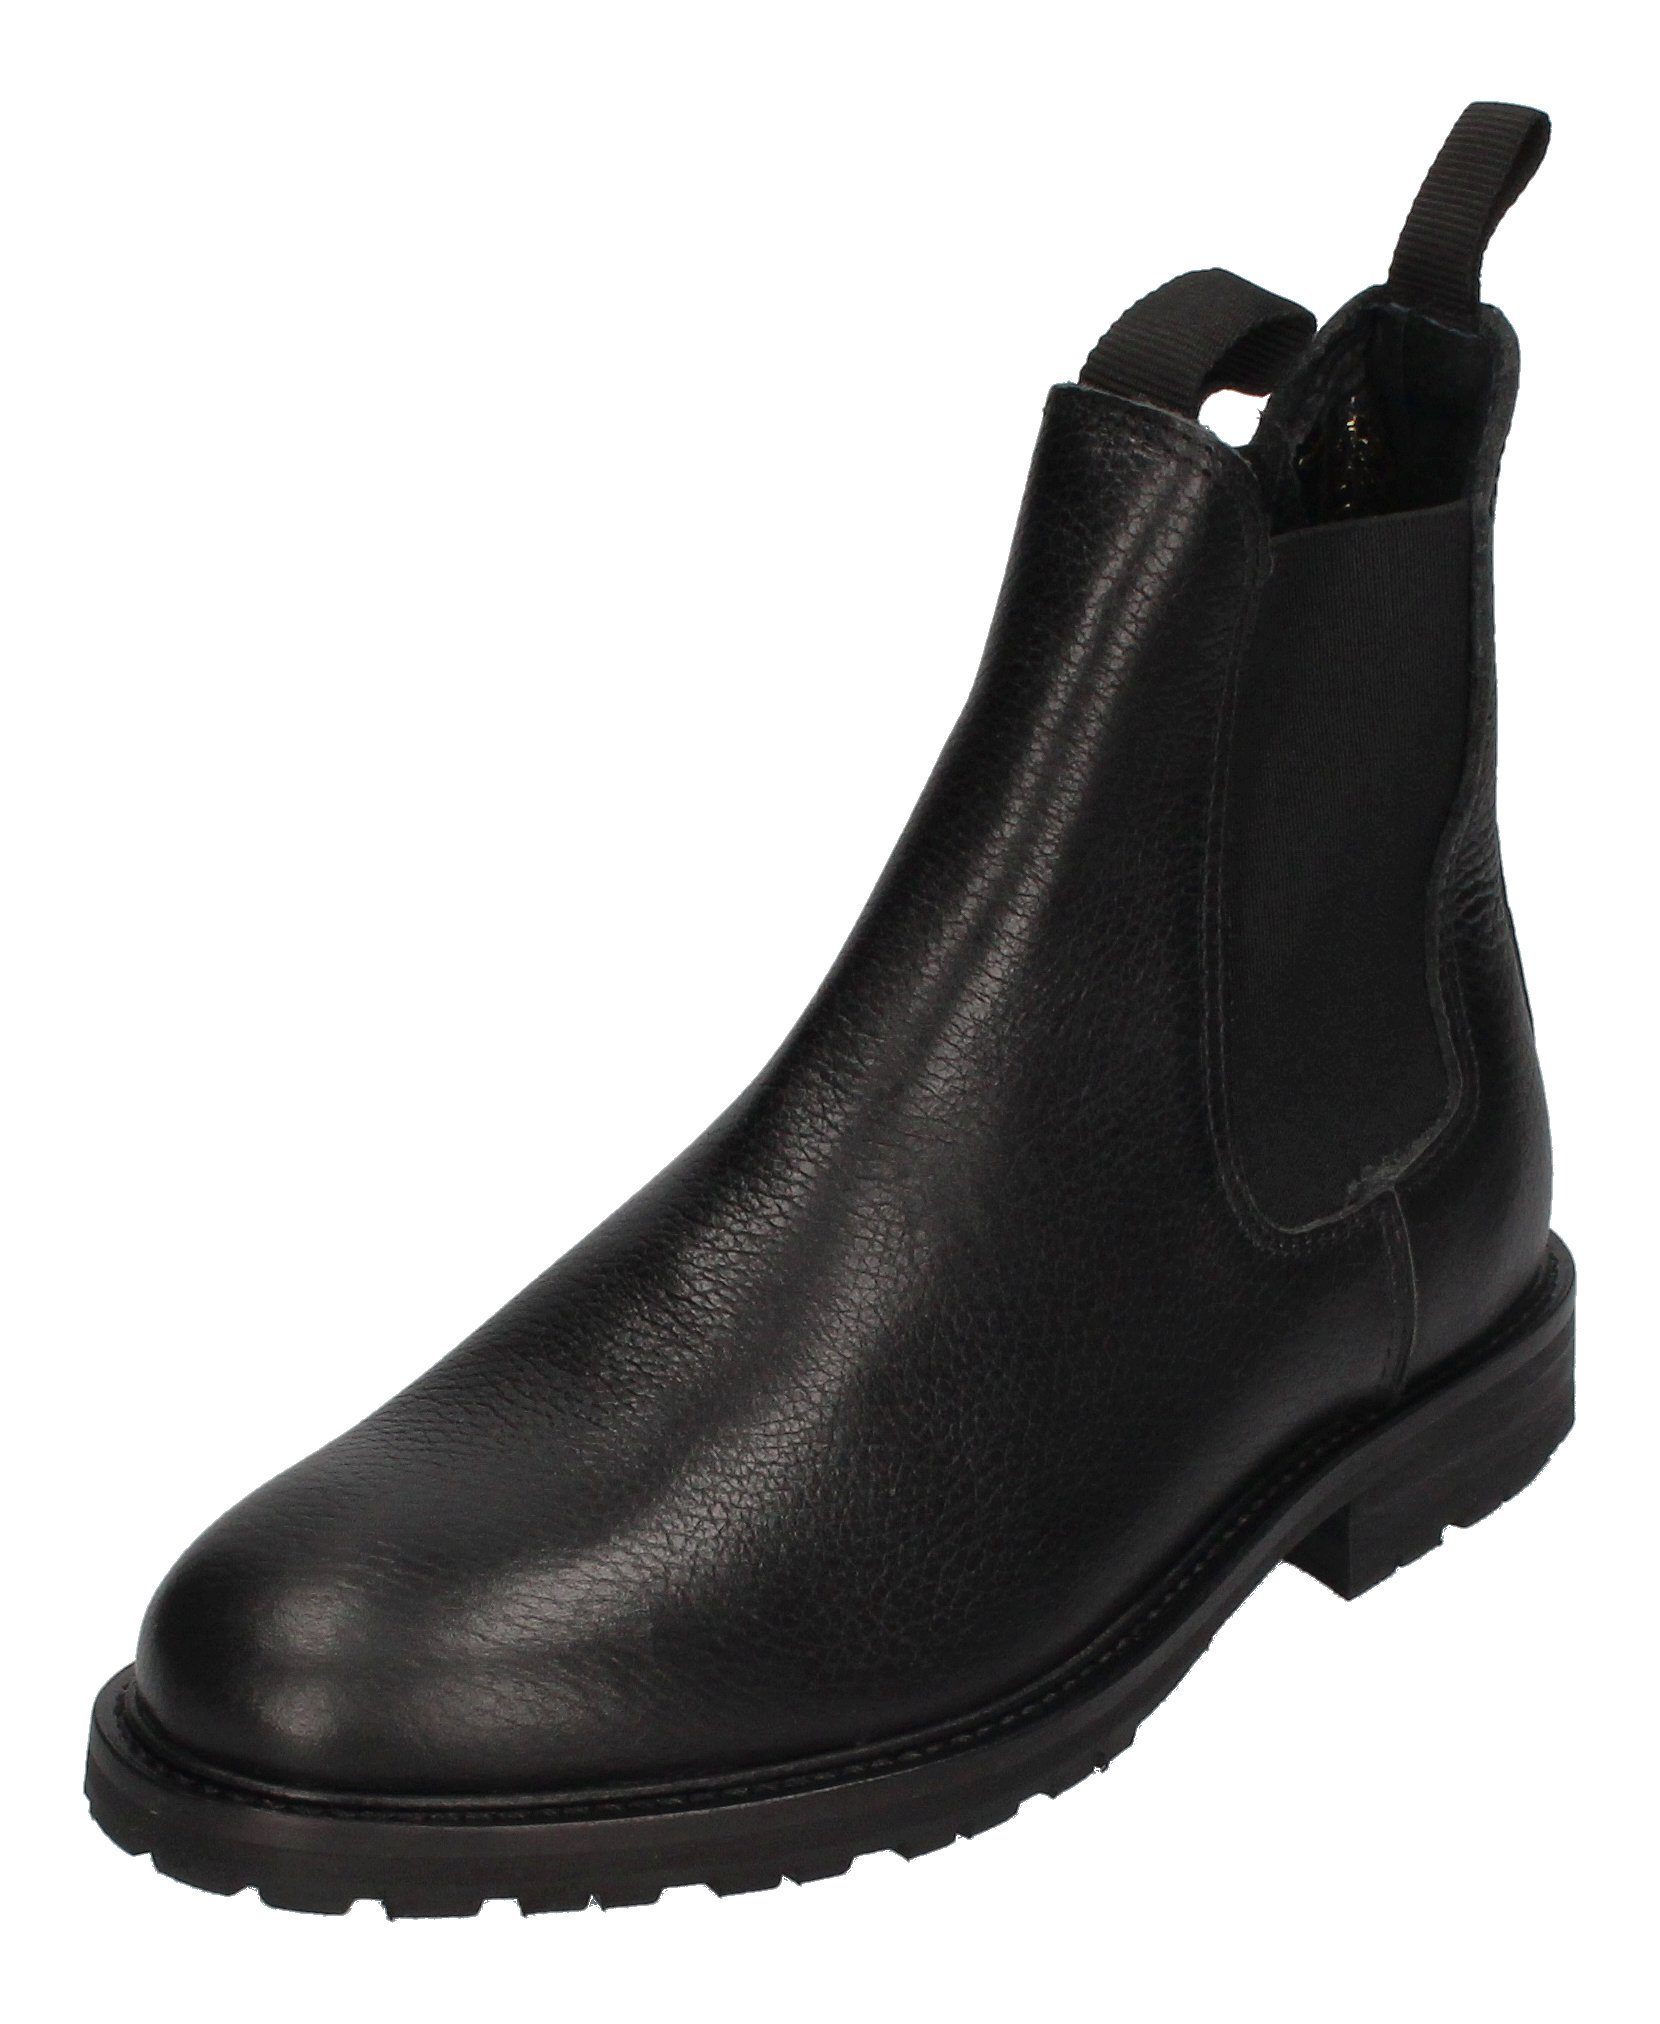 SHOE THE BEAR AVERY STB2028 L Chelseaboots Black